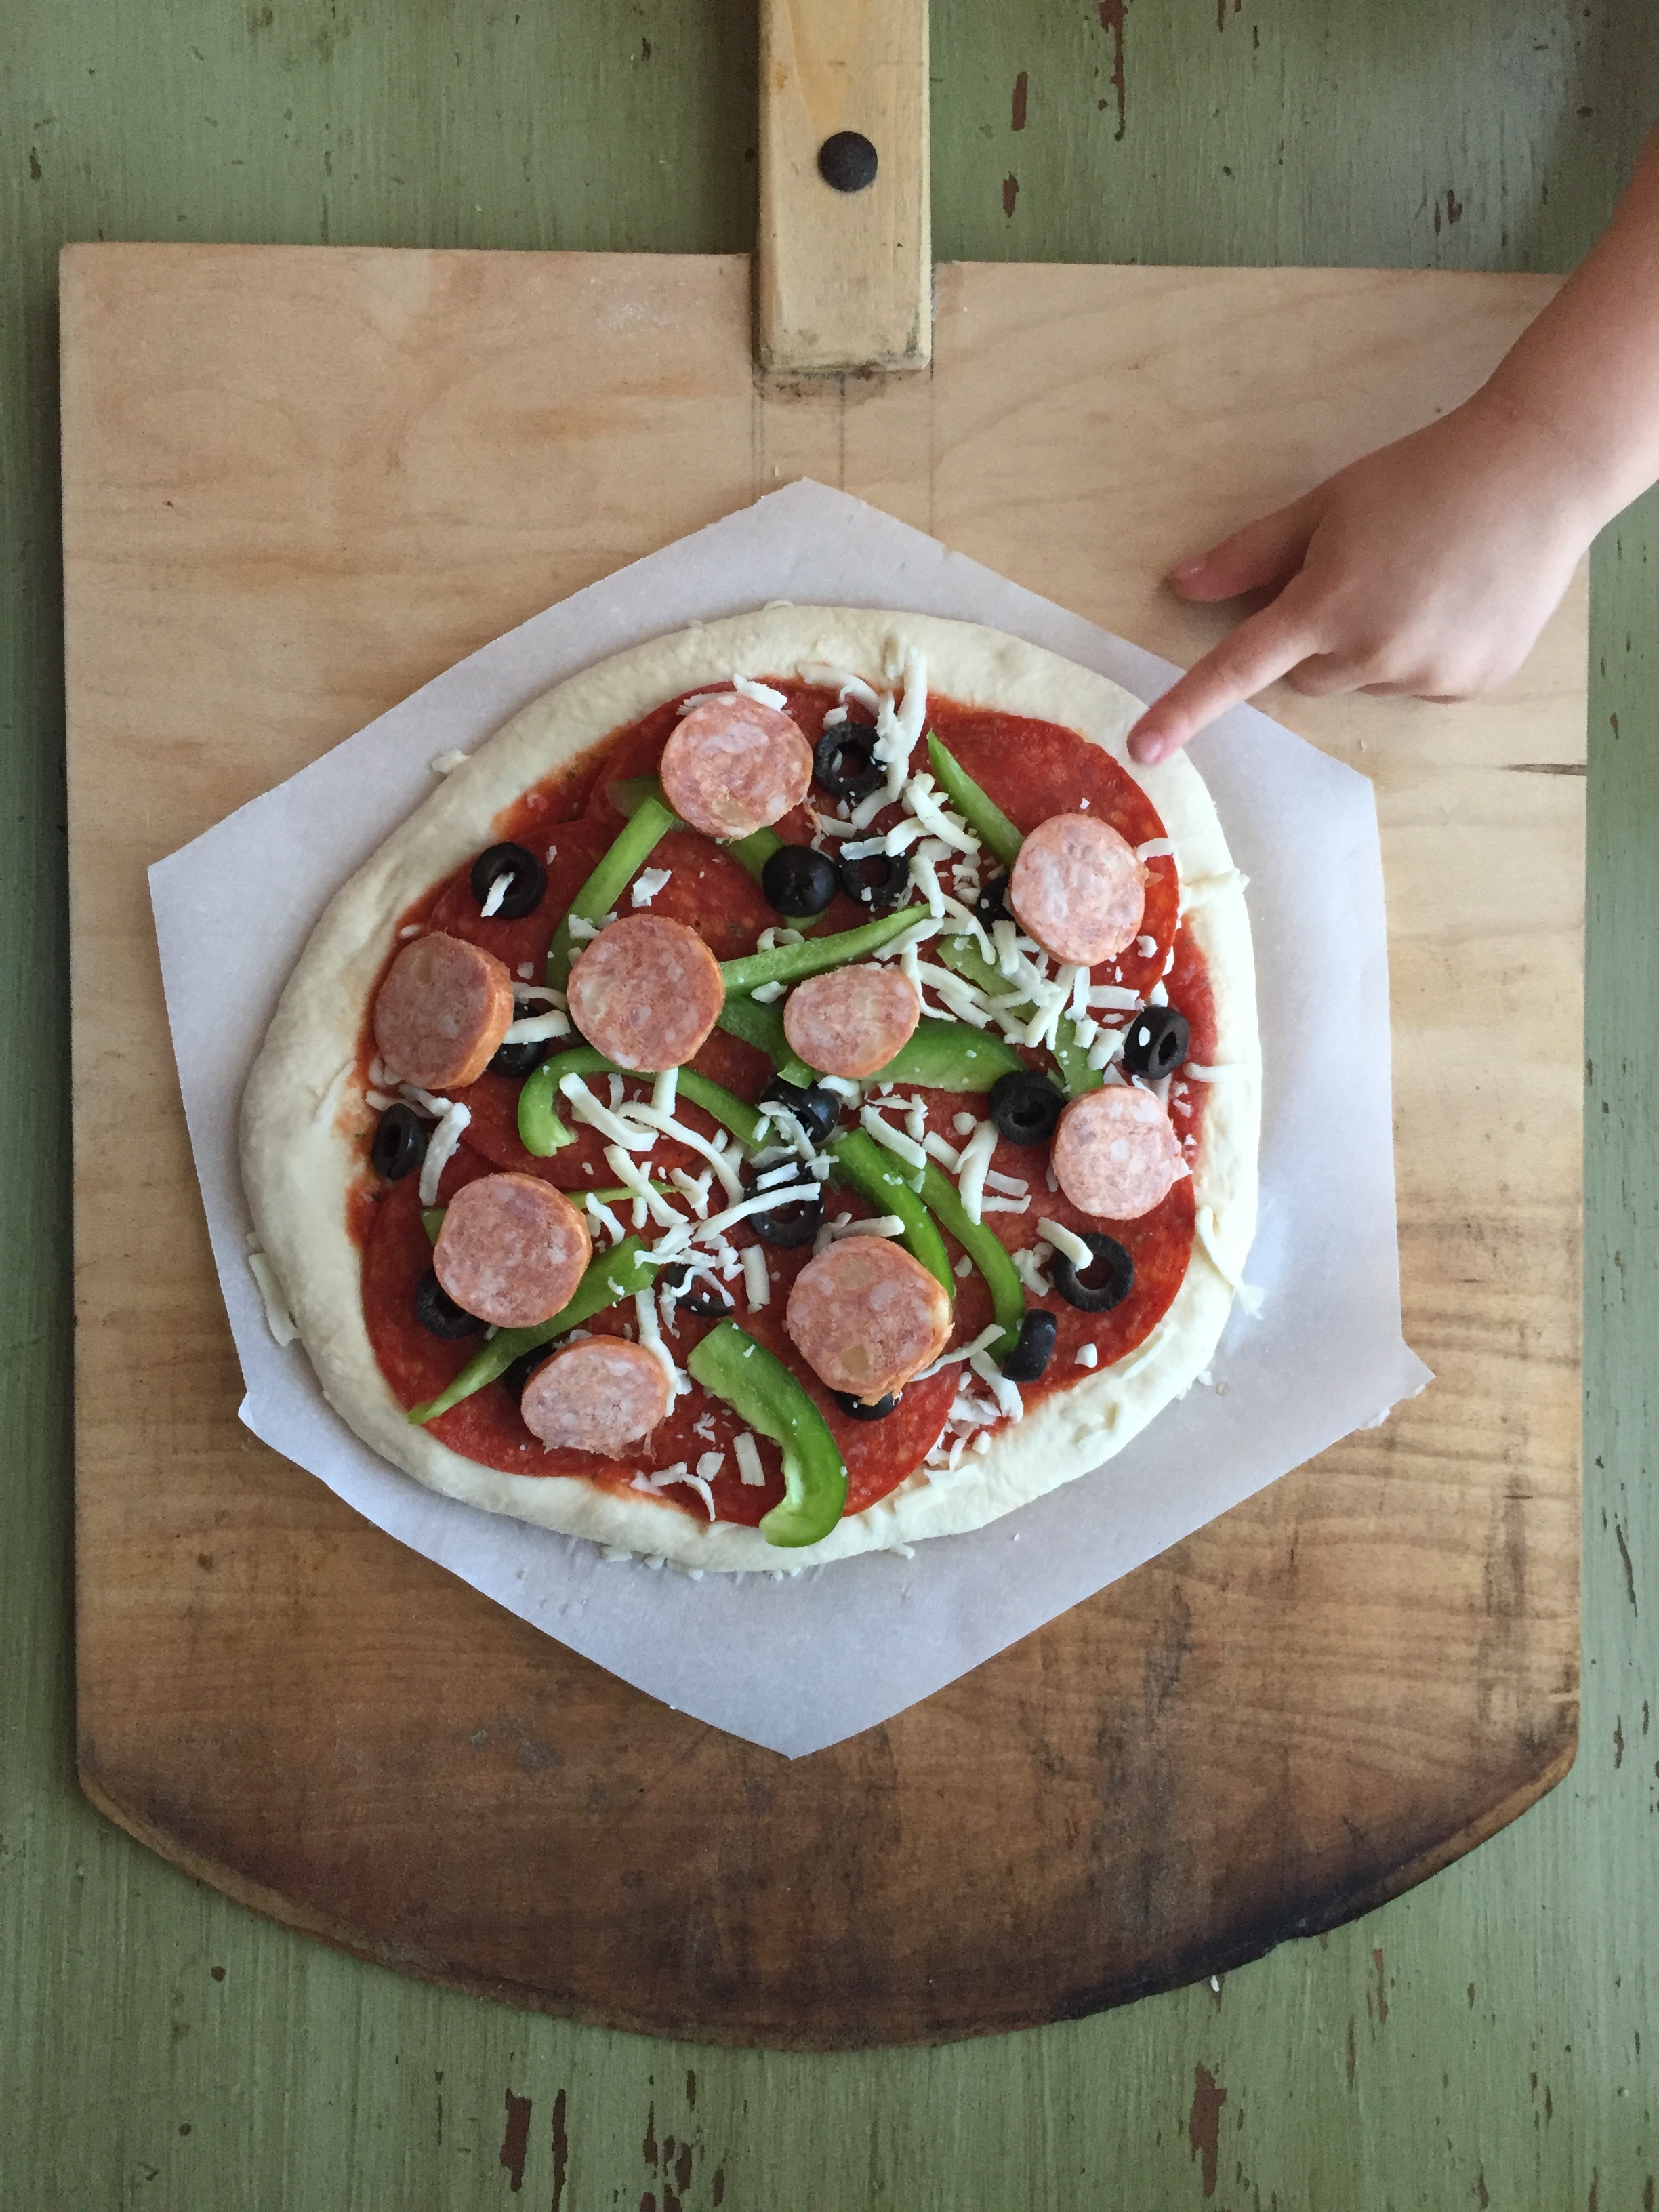  Do your final shape on parchment paper and add your toppings. Slide your peel under the pizza and its ready to bake! 